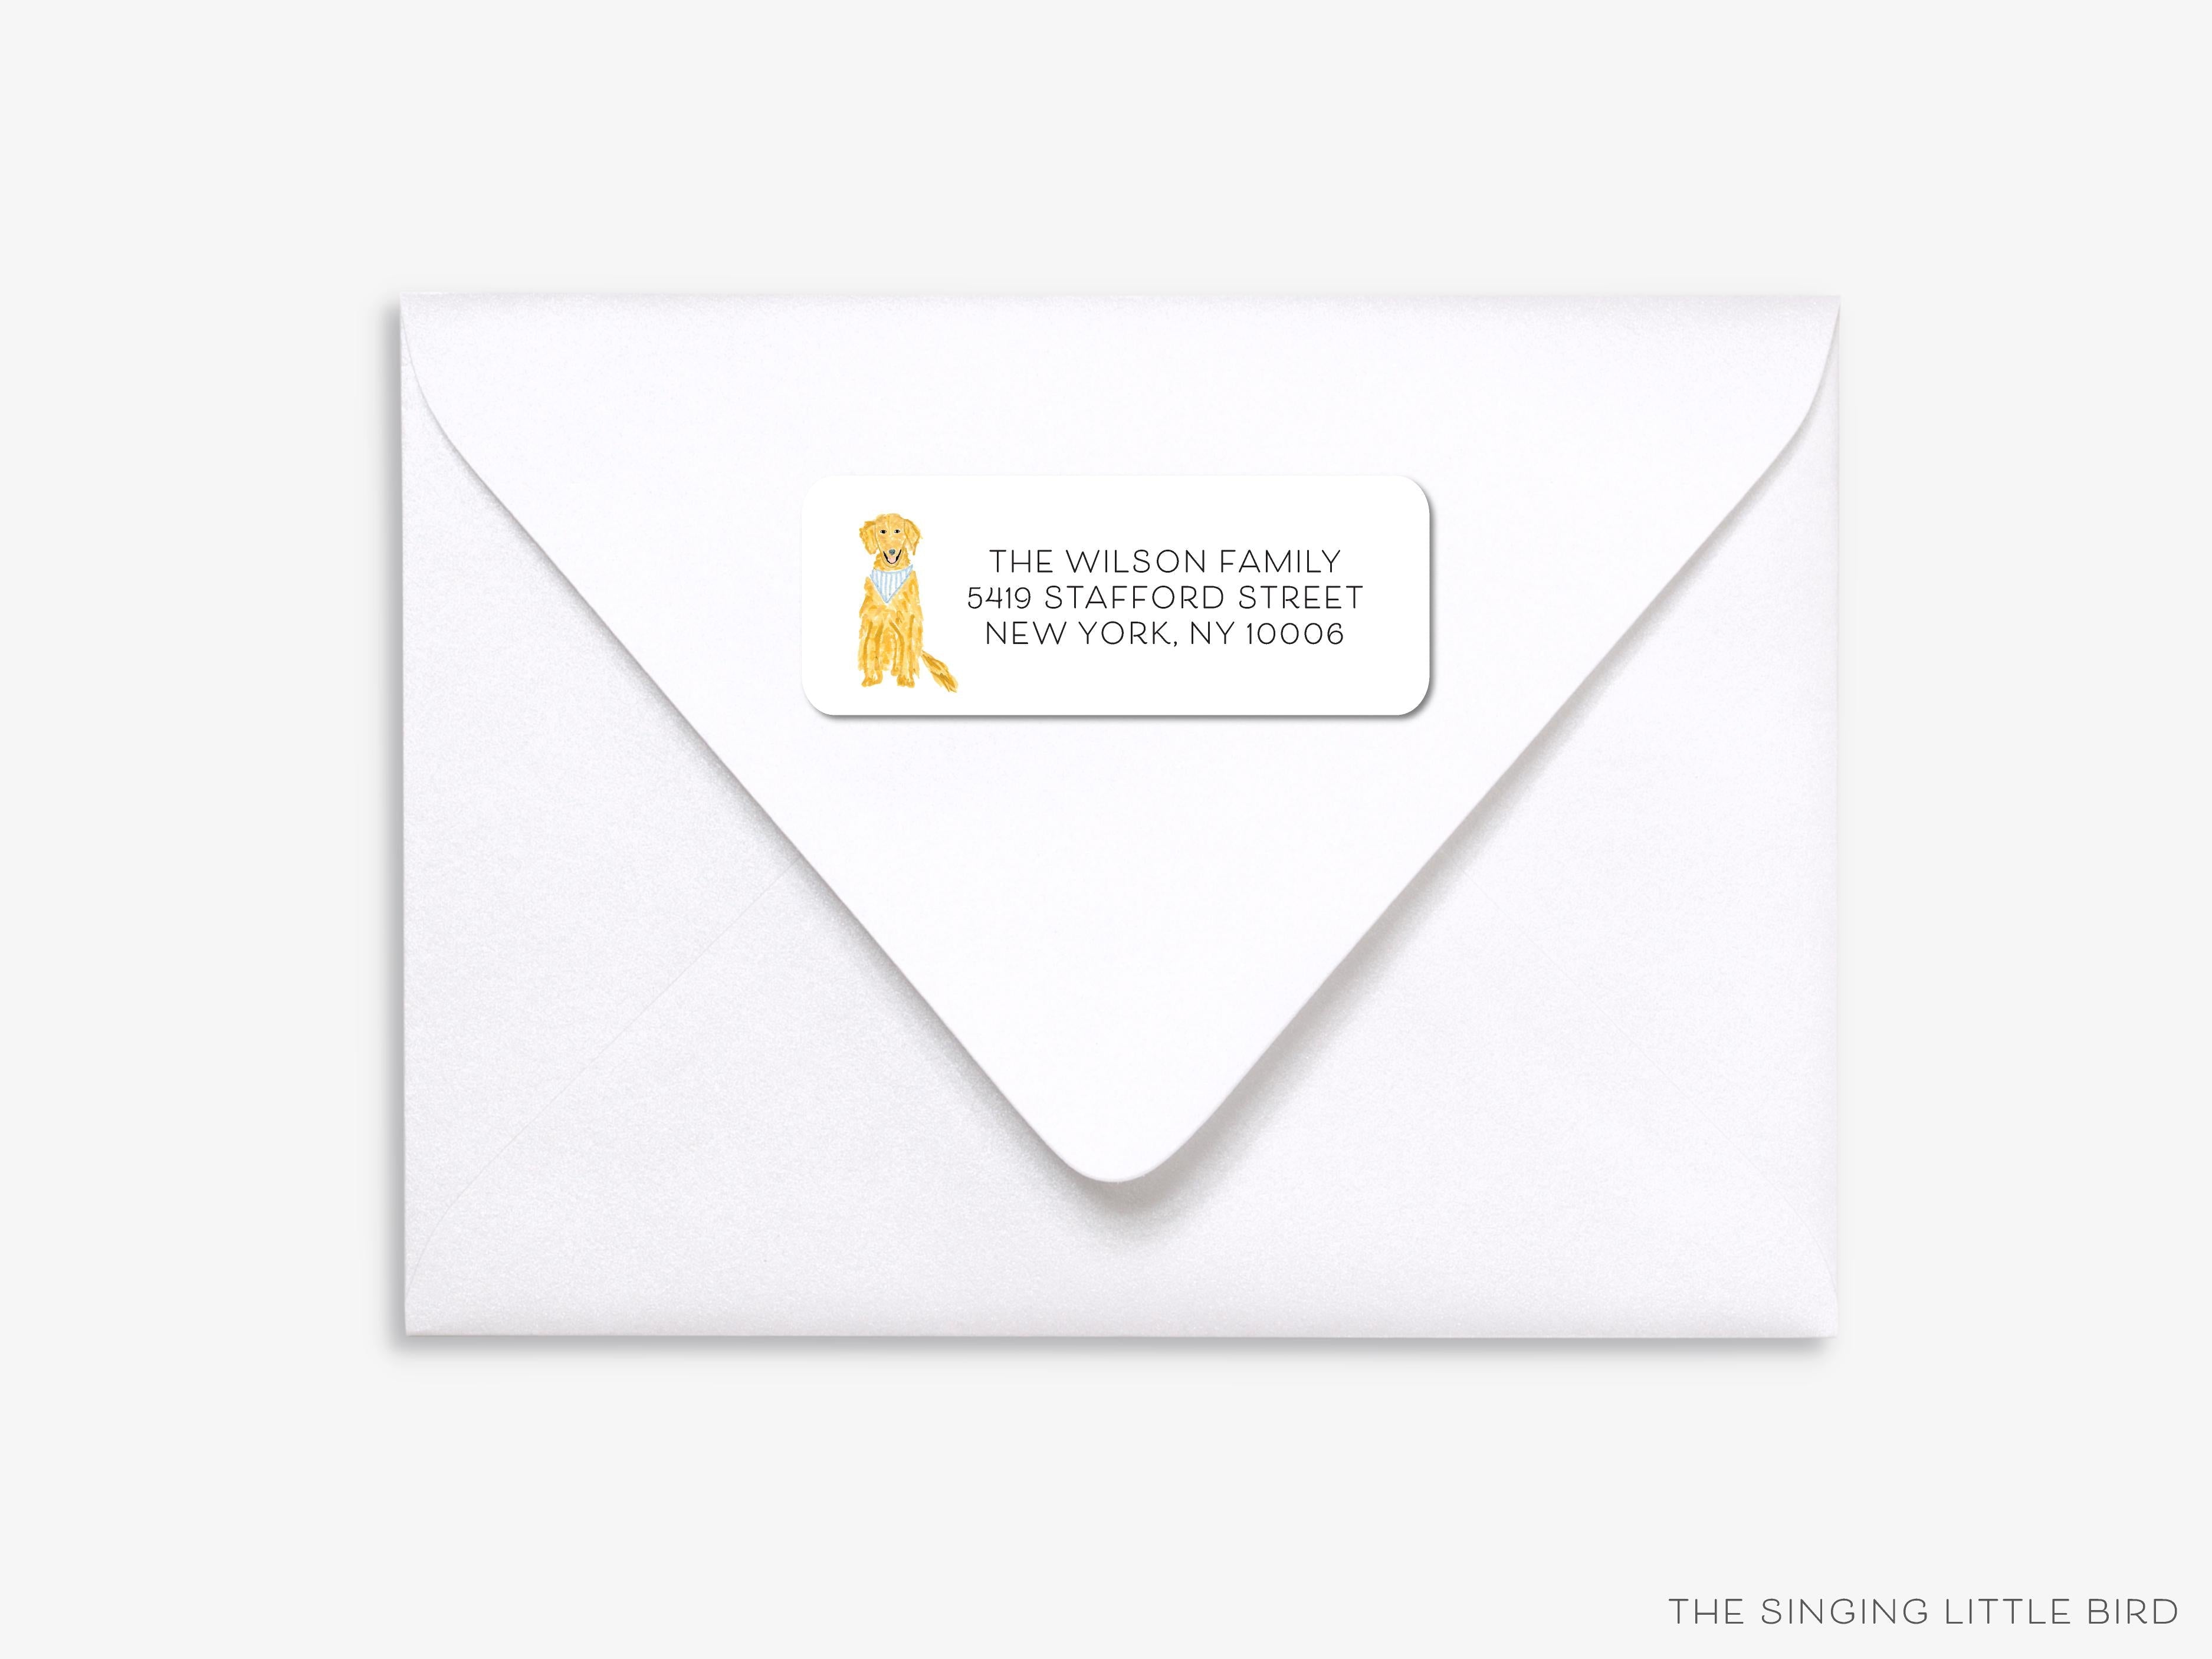 Golden Retriever Return Address Labels-These personalized return address labels are 2.625" x 1" and feature our hand-painted watercolor golden retriever, printed in the USA on beautiful matte finish labels. These make great gifts for yourself or the animal lover.-The Singing Little Bird